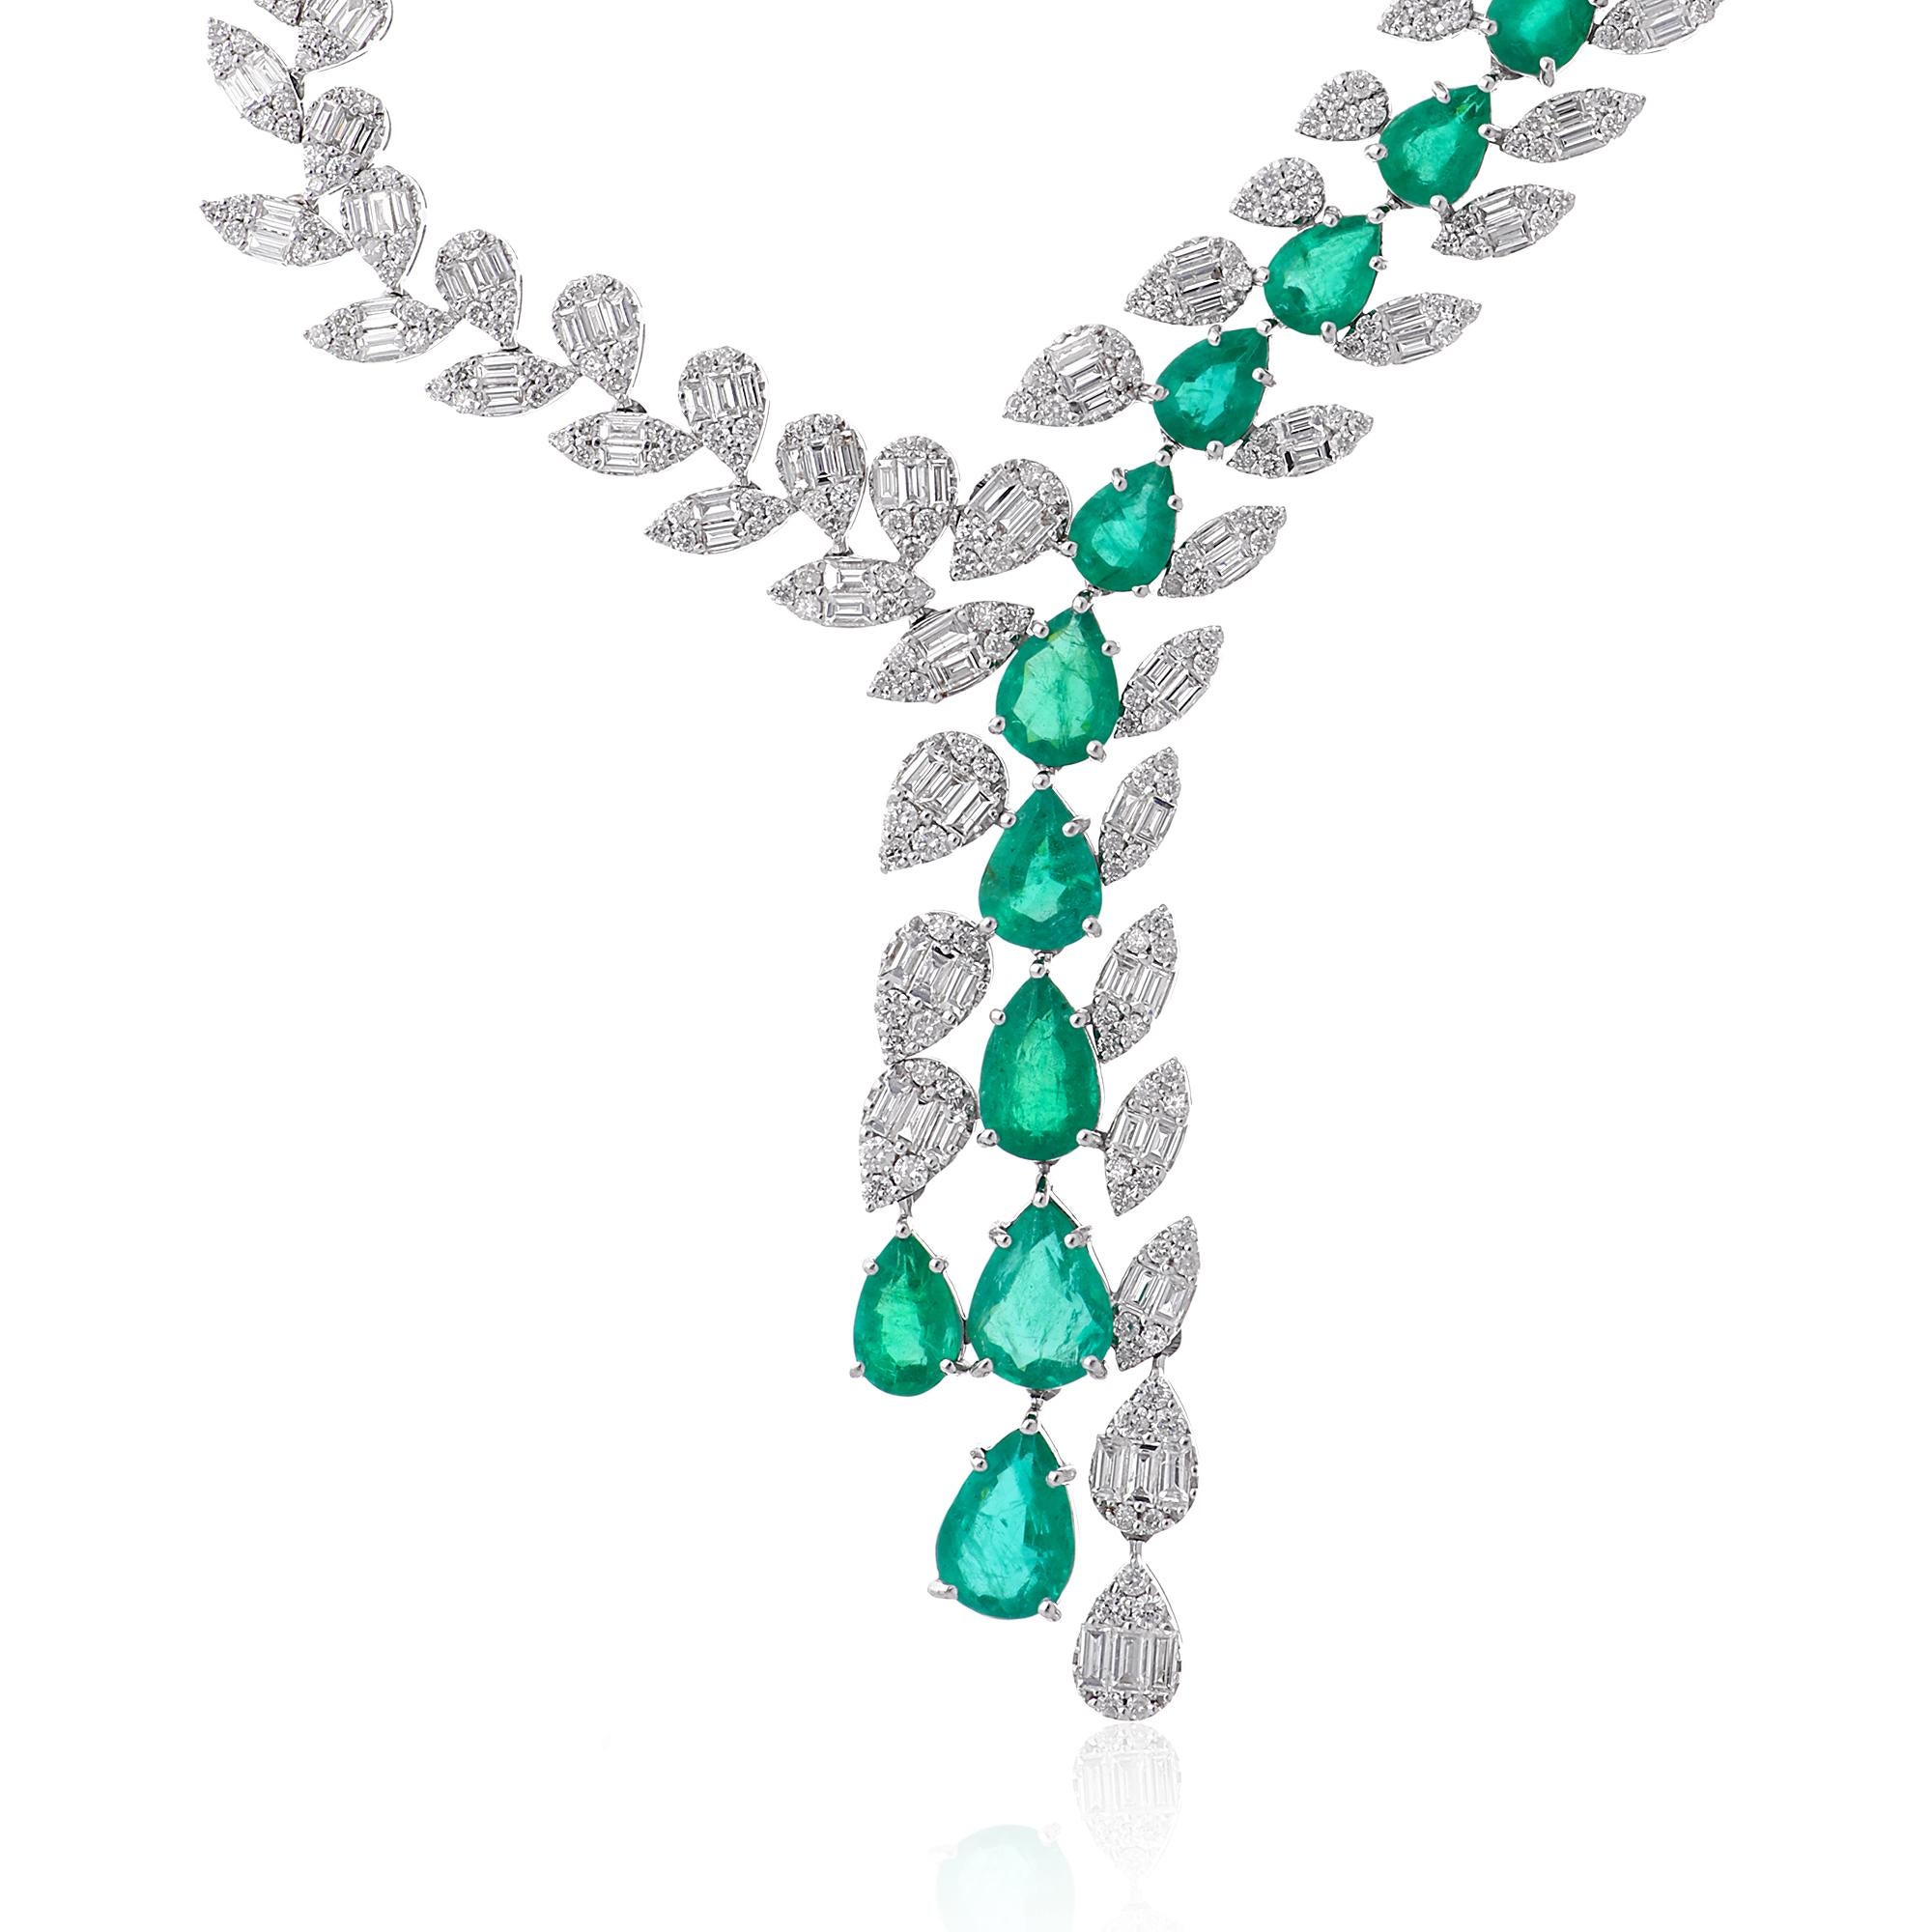 At the heart of this necklace lies a captivating pear-shaped emerald, sourced for its exceptional quality and natural allure. Known for its lush green hue and striking clarity, the emerald exudes a sense of timeless beauty and sophistication. It is